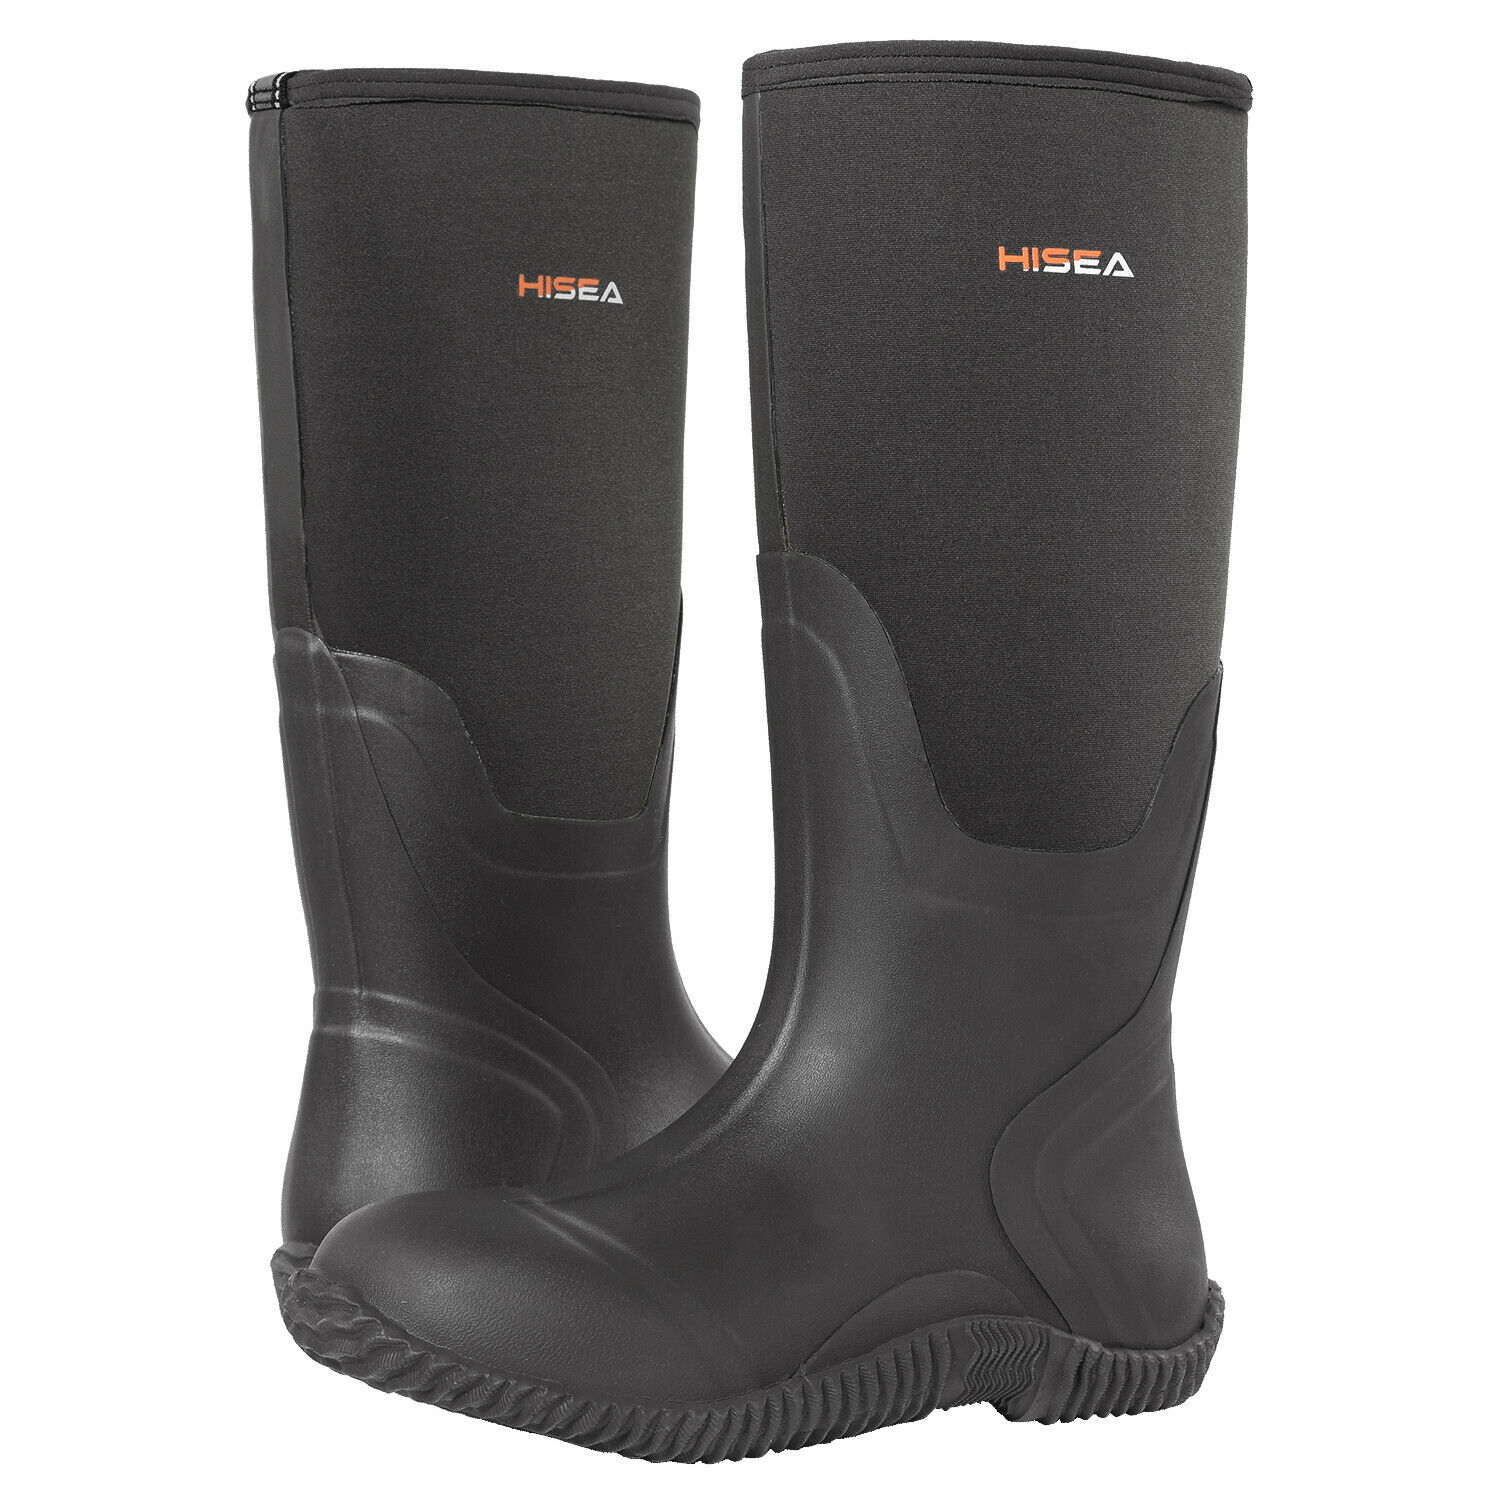 a pair of black HISEA Outdoor Muck Boots for winter hunting boot